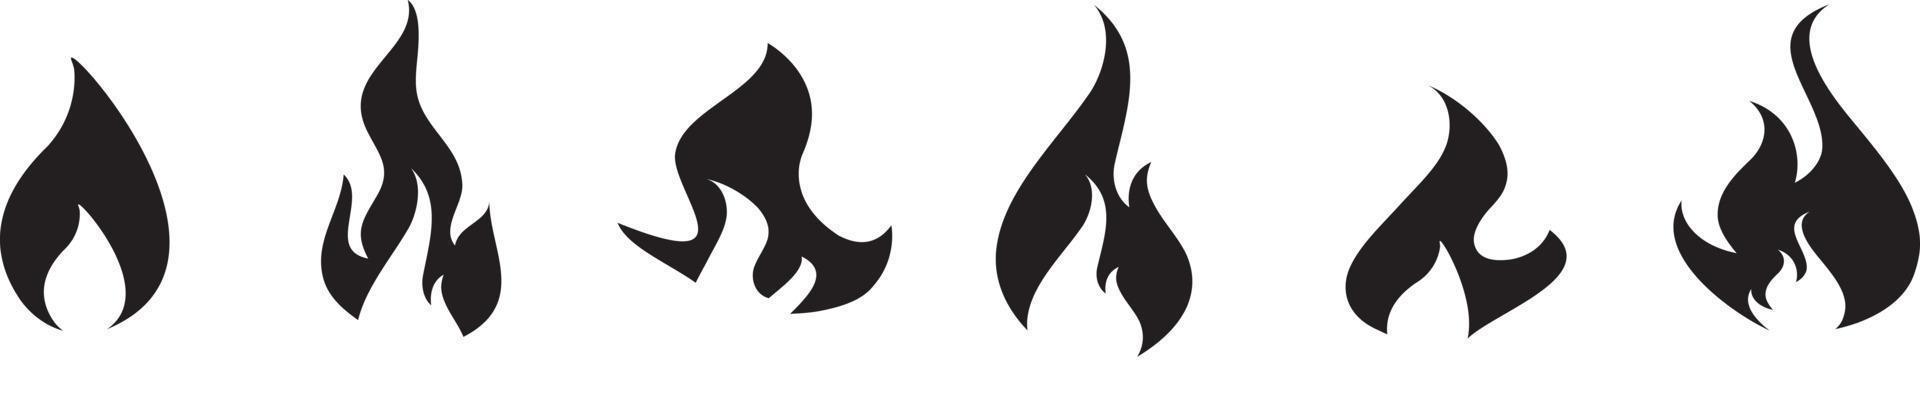 Fire icon collection. Fire flame symbol. Bonfire silhouette logotype. Flames symbols set flat style - stock vector. vector